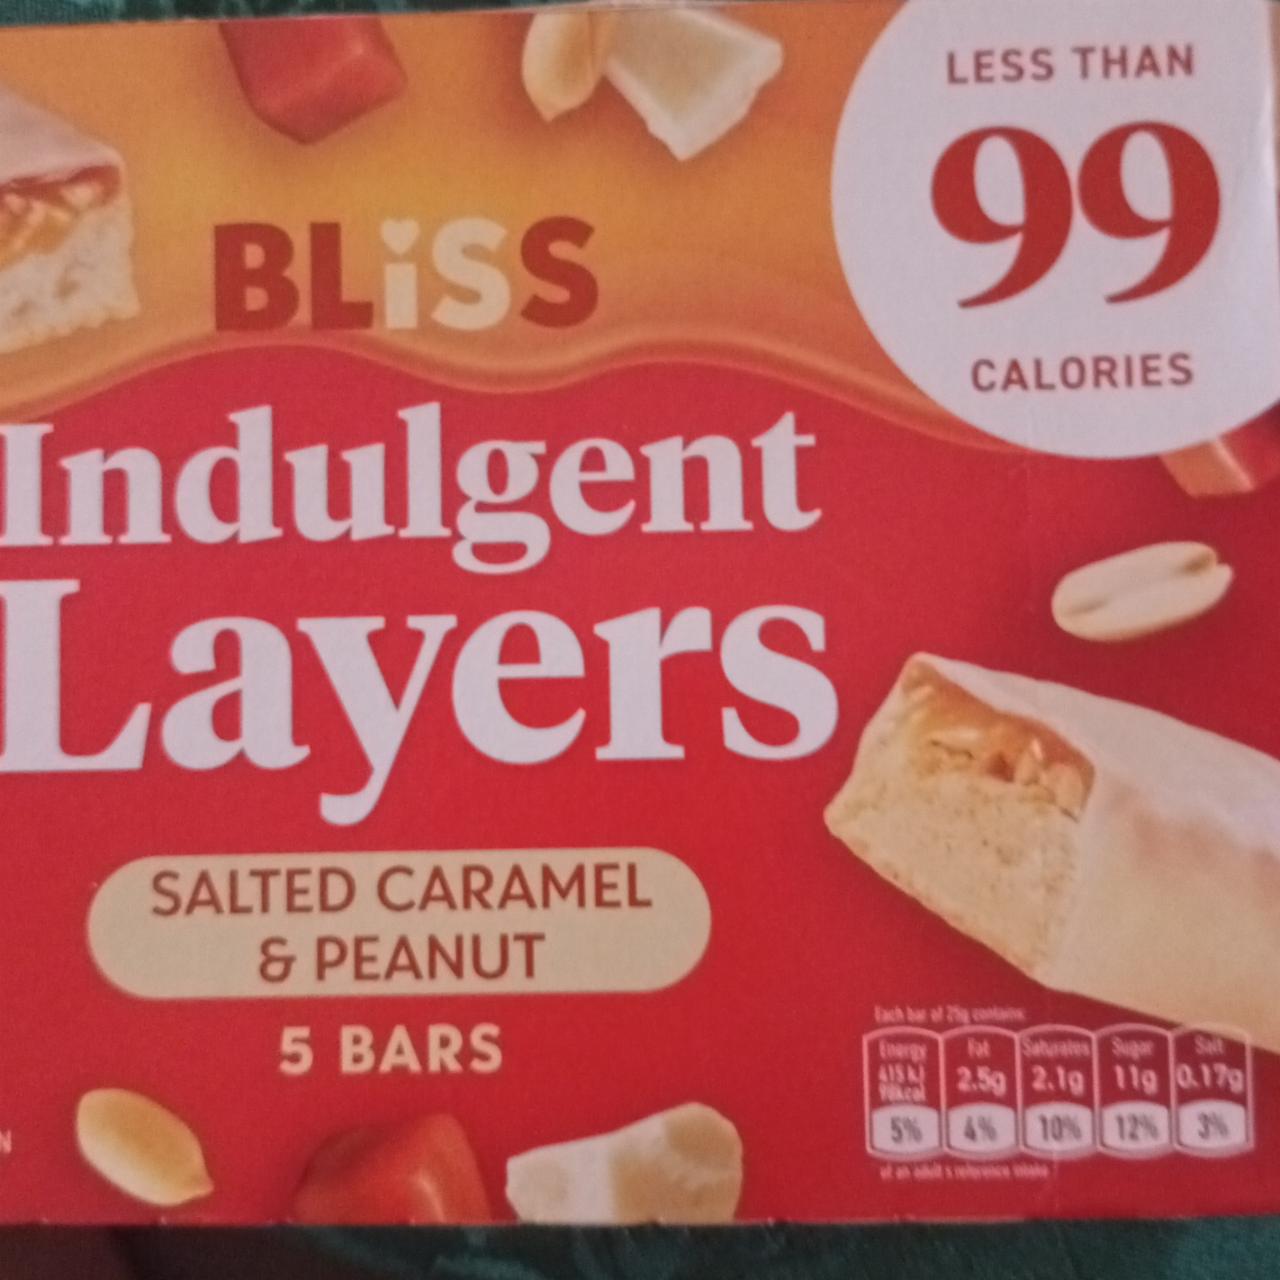 Fotografie - Indulgent Layers Salted Caramel and Peanut 5 bars Bliss